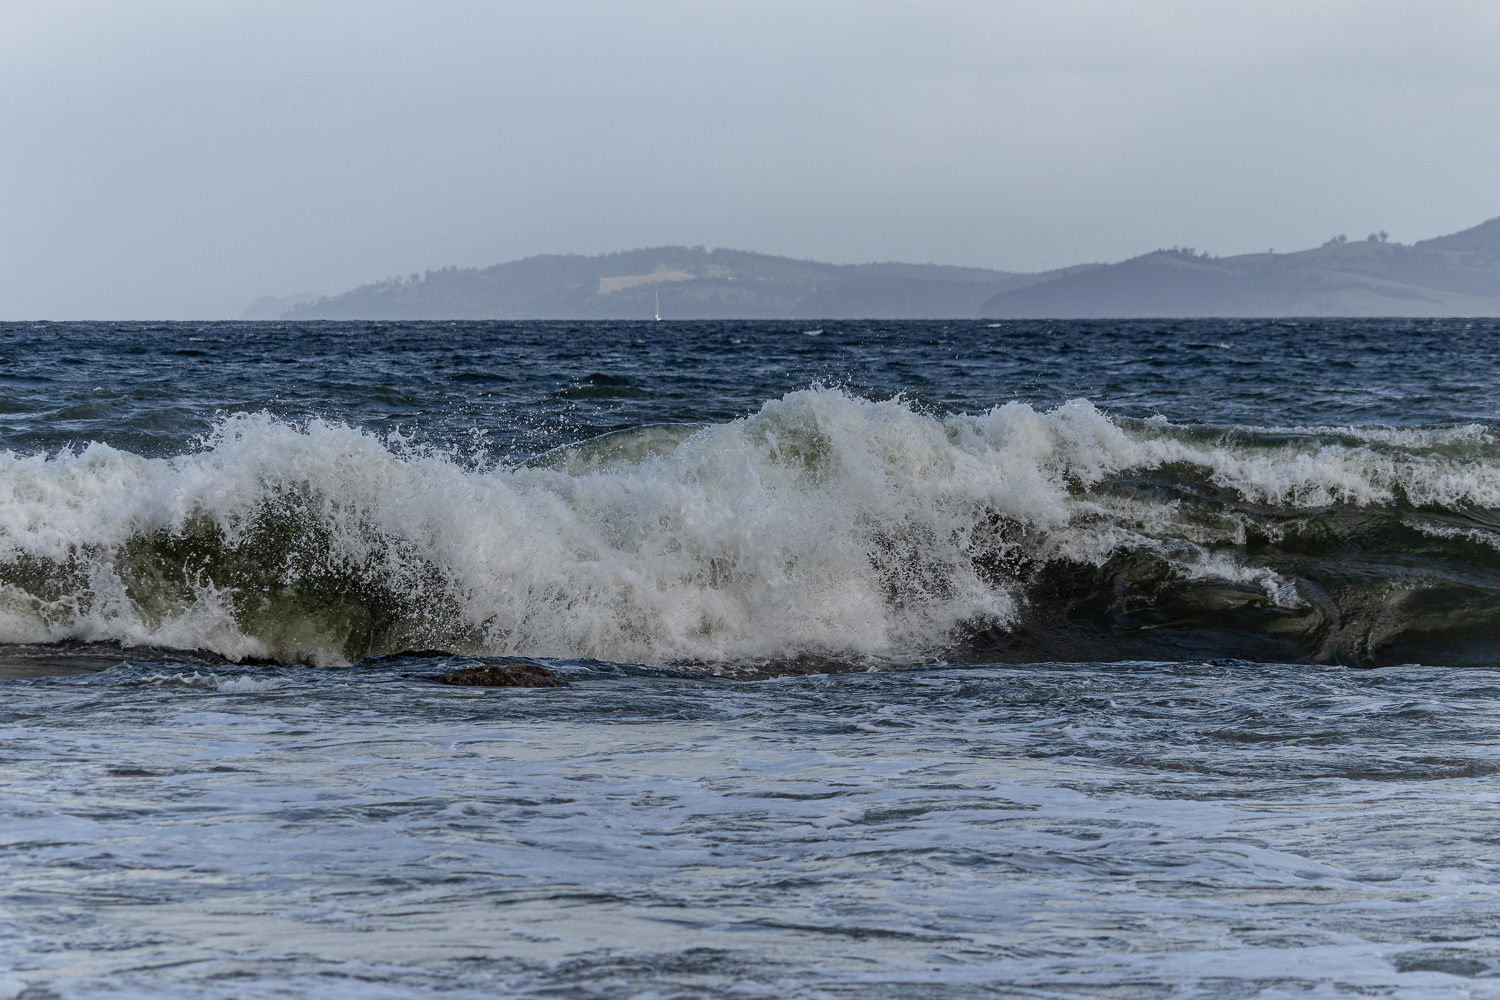 A foamy incoming wave in the water with hills in the background